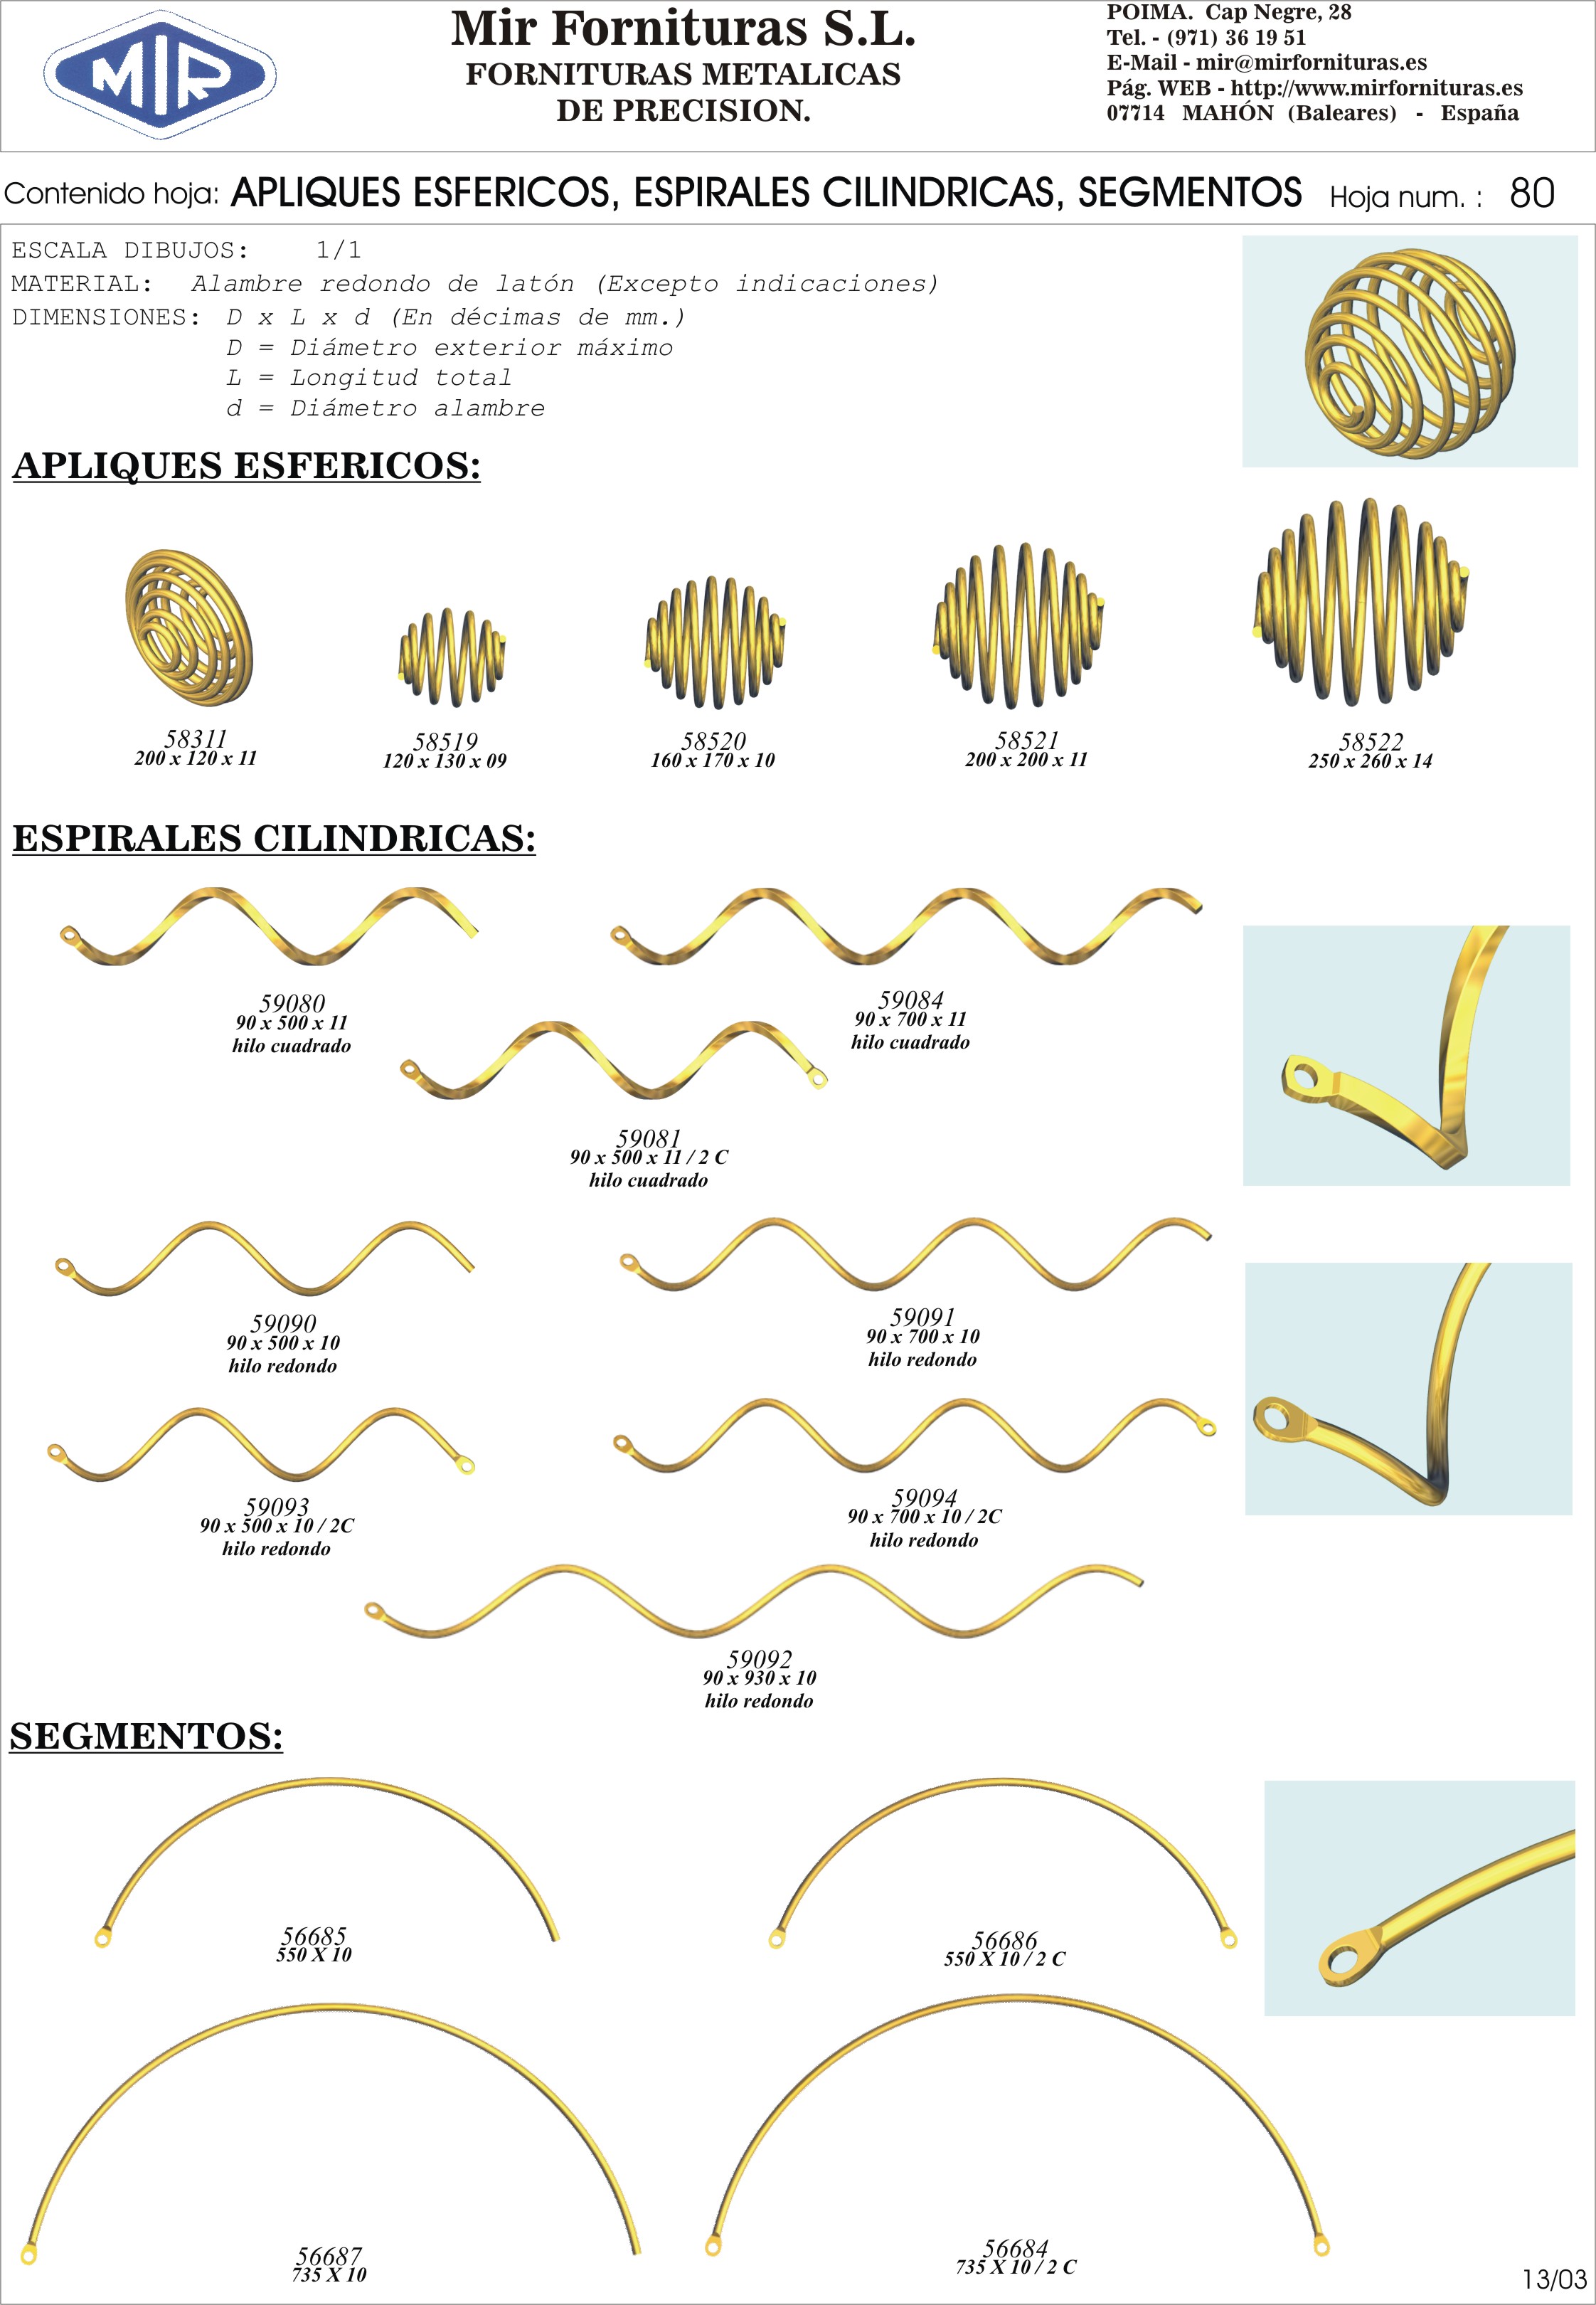 Mir Fornituras, S. L. Spherical Beads, Cylindrical Spiral & Segments